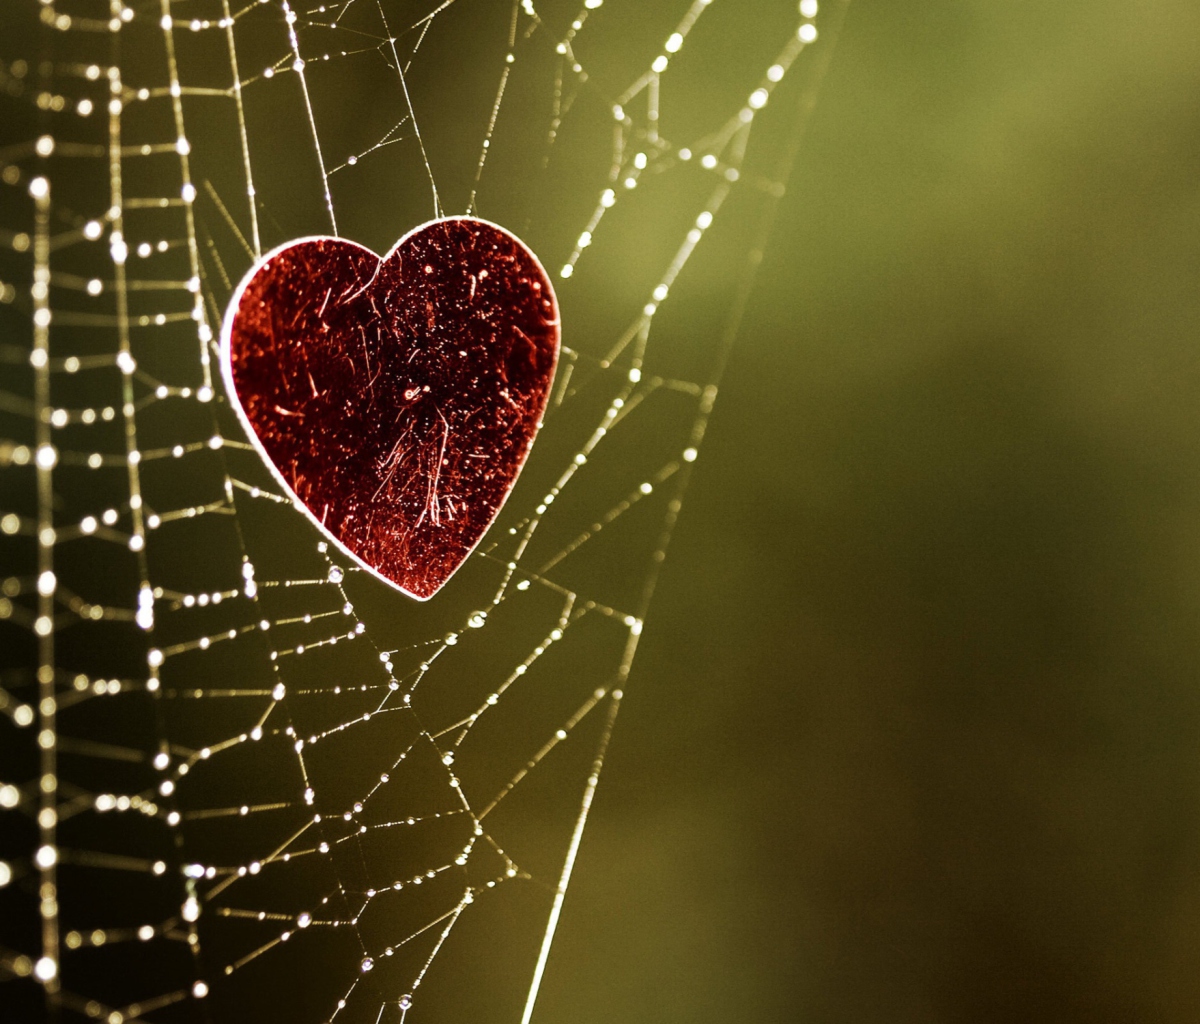 Heart And Spider Web wallpaper 1200x1024